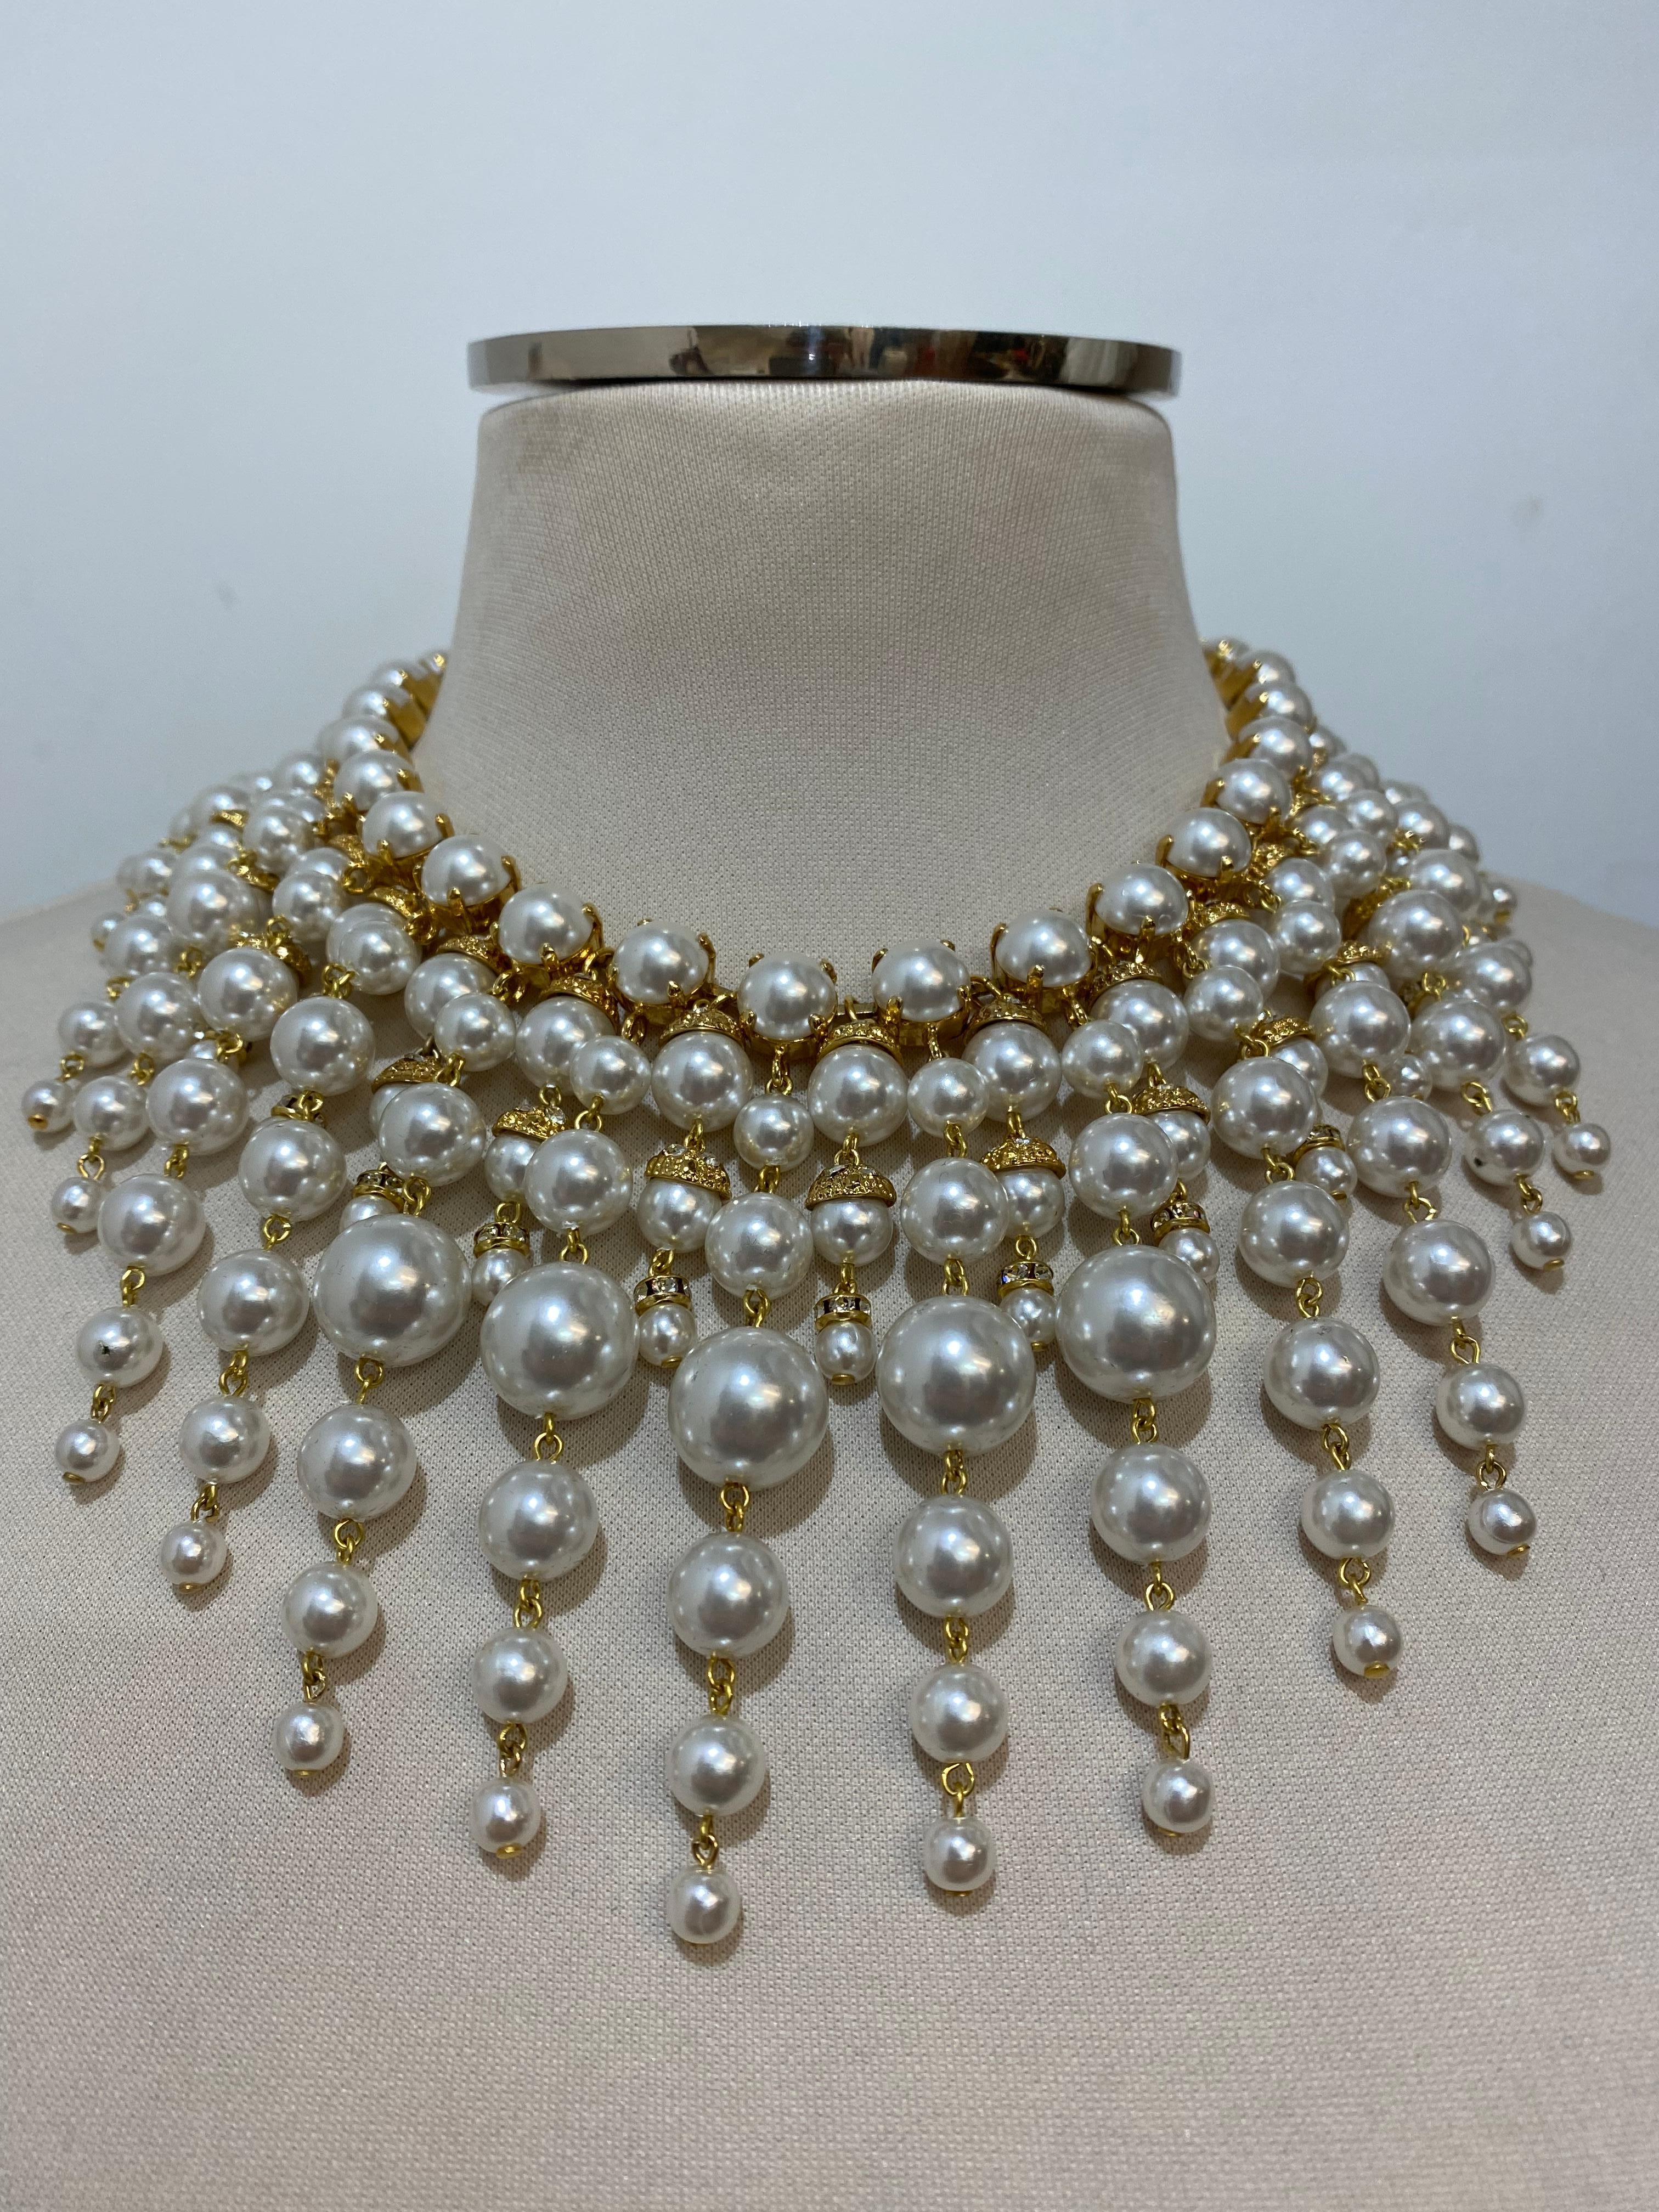 Beautiful masterpiece by Carlo Zini
One of the world greatest bijoux designers
Multi drops style
Non allergenic brass
18 KT 3 micron Gold dipped
Faux pearls
100% Artisanal work made in Milano
Worldwide express shipping included in the price !